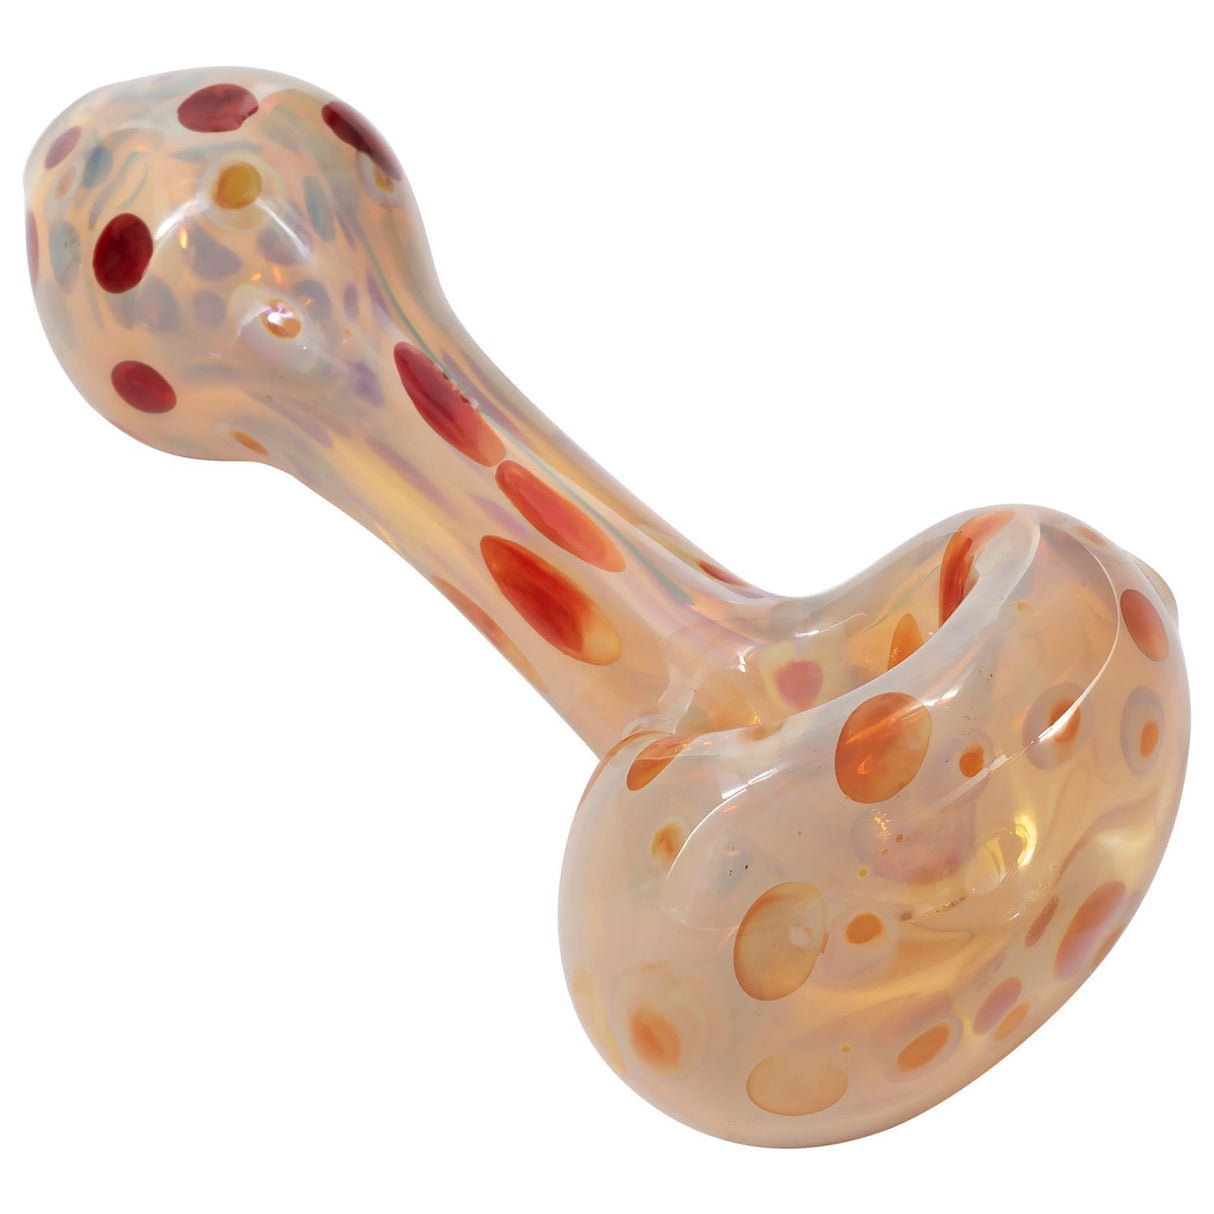 LA Pipes Polka Dot Glass Spoon Pipe in Assorted Colors, Borosilicate, Side View